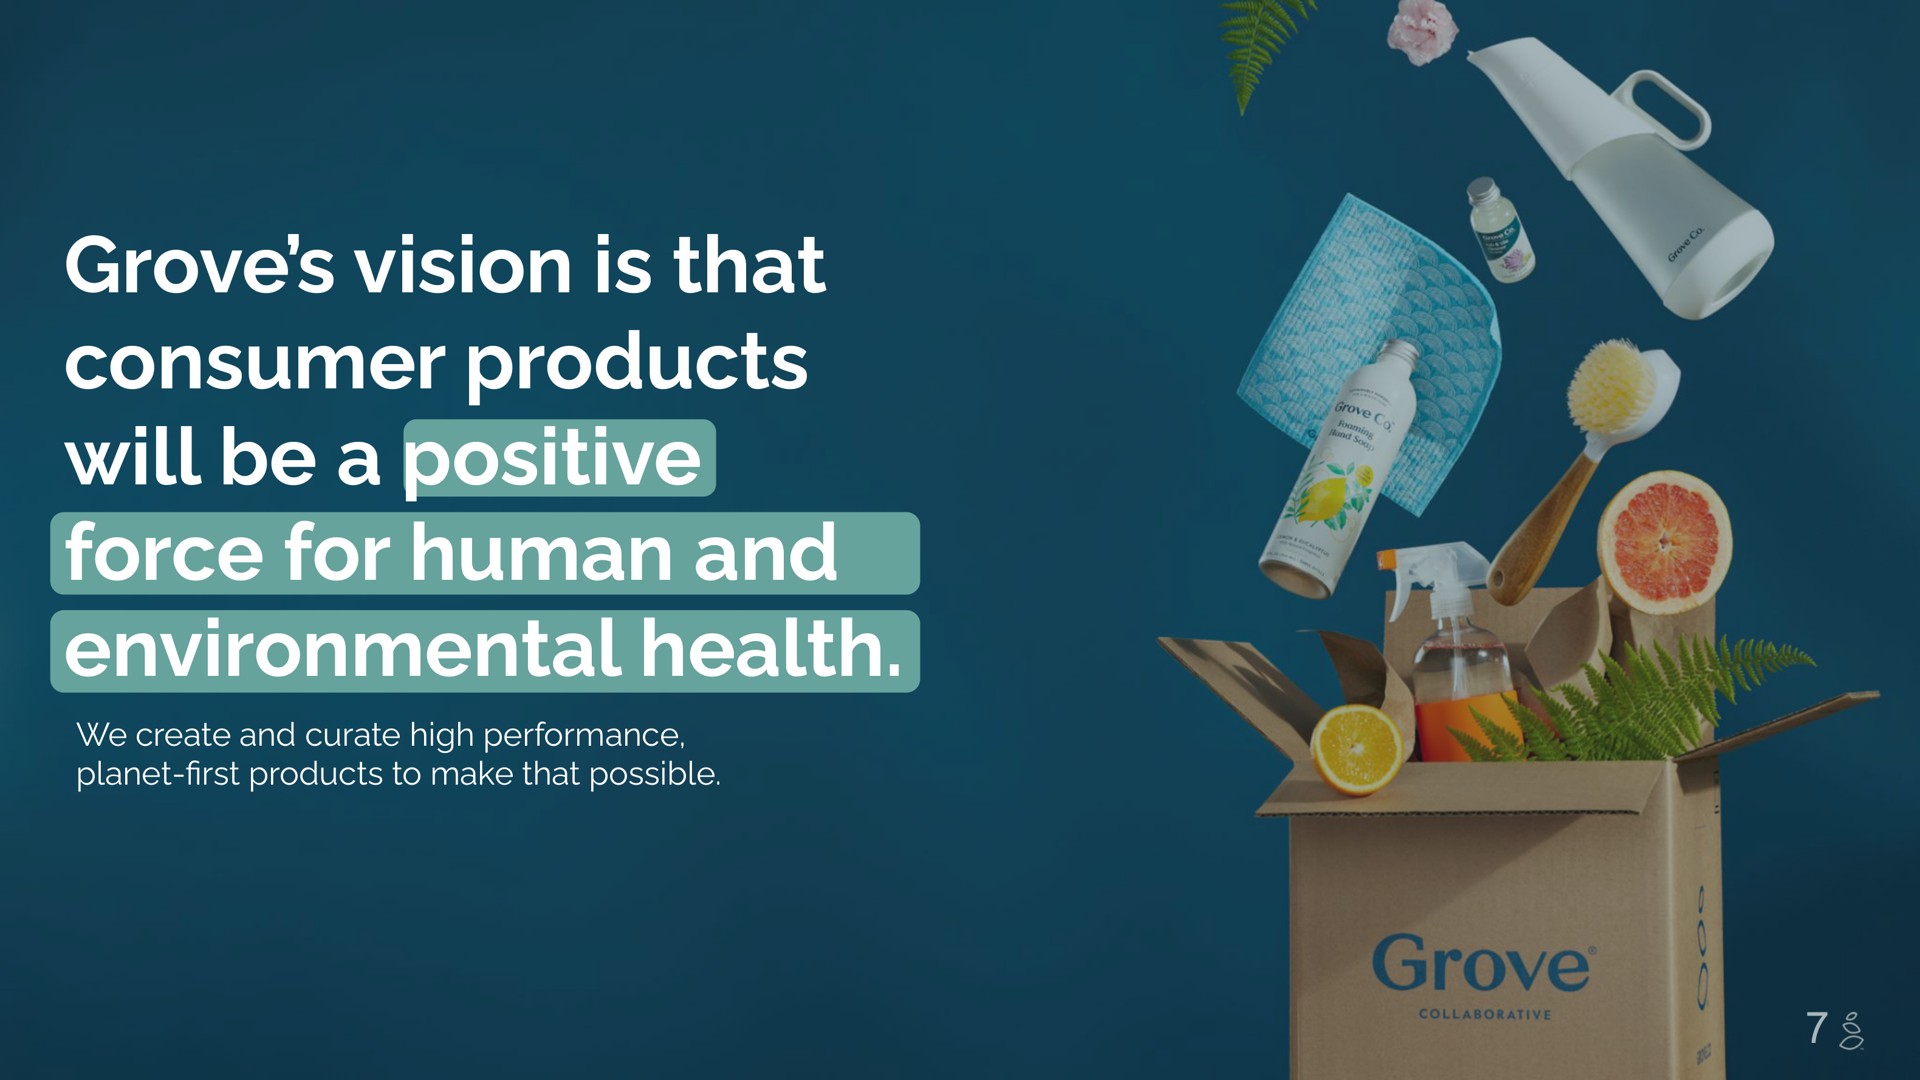 grove vision is that consumer products will be a positive force for human and environmental health cicer cleat | Grove